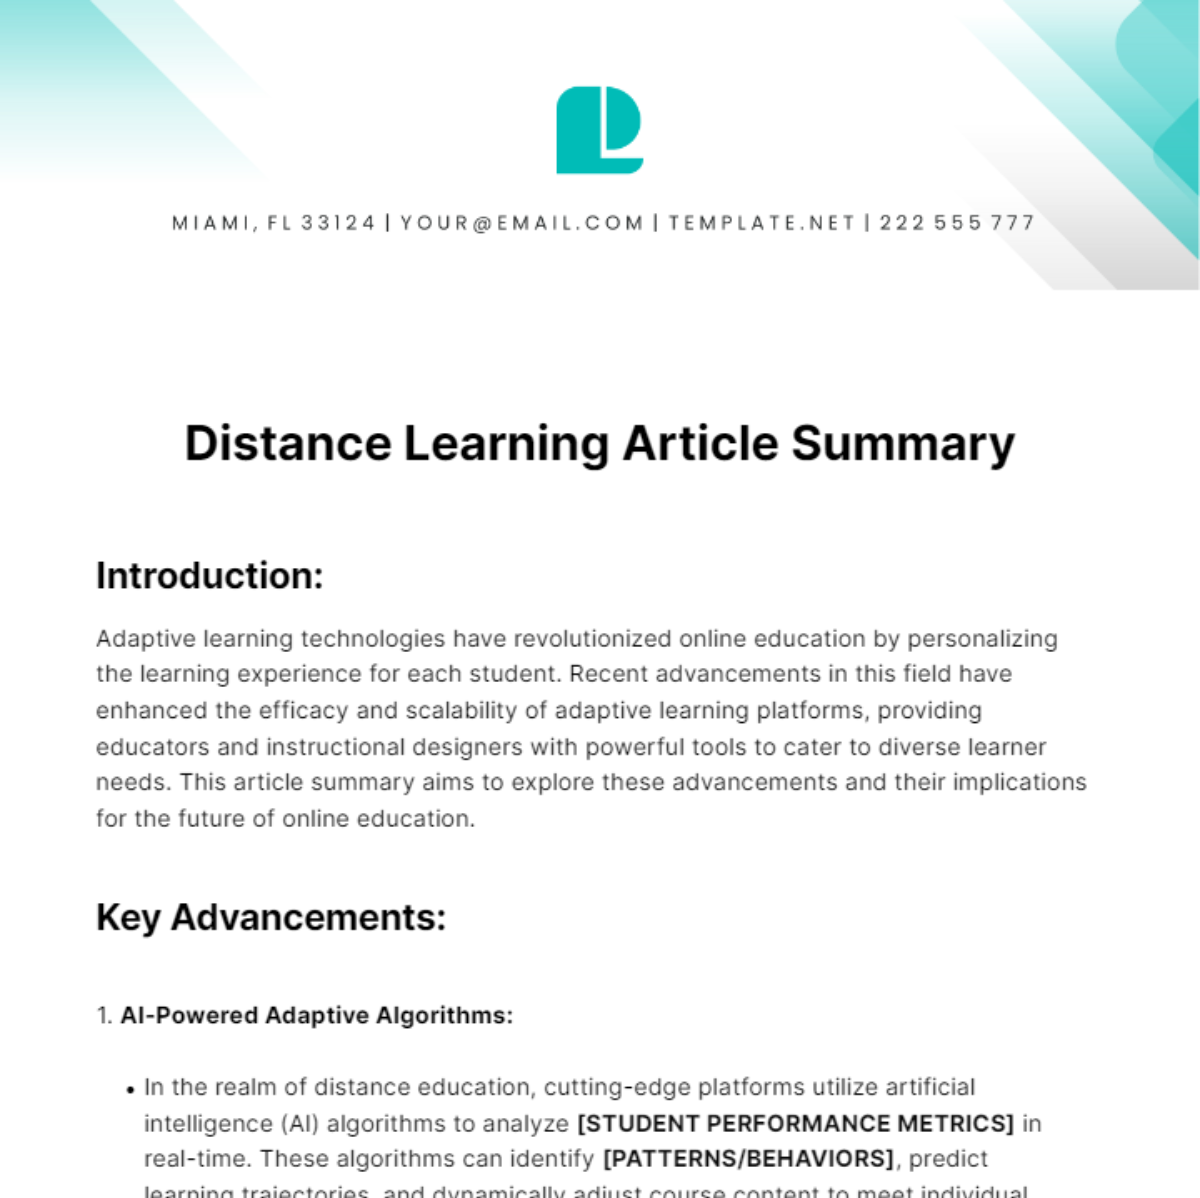 Distance Learning Article Summary Template